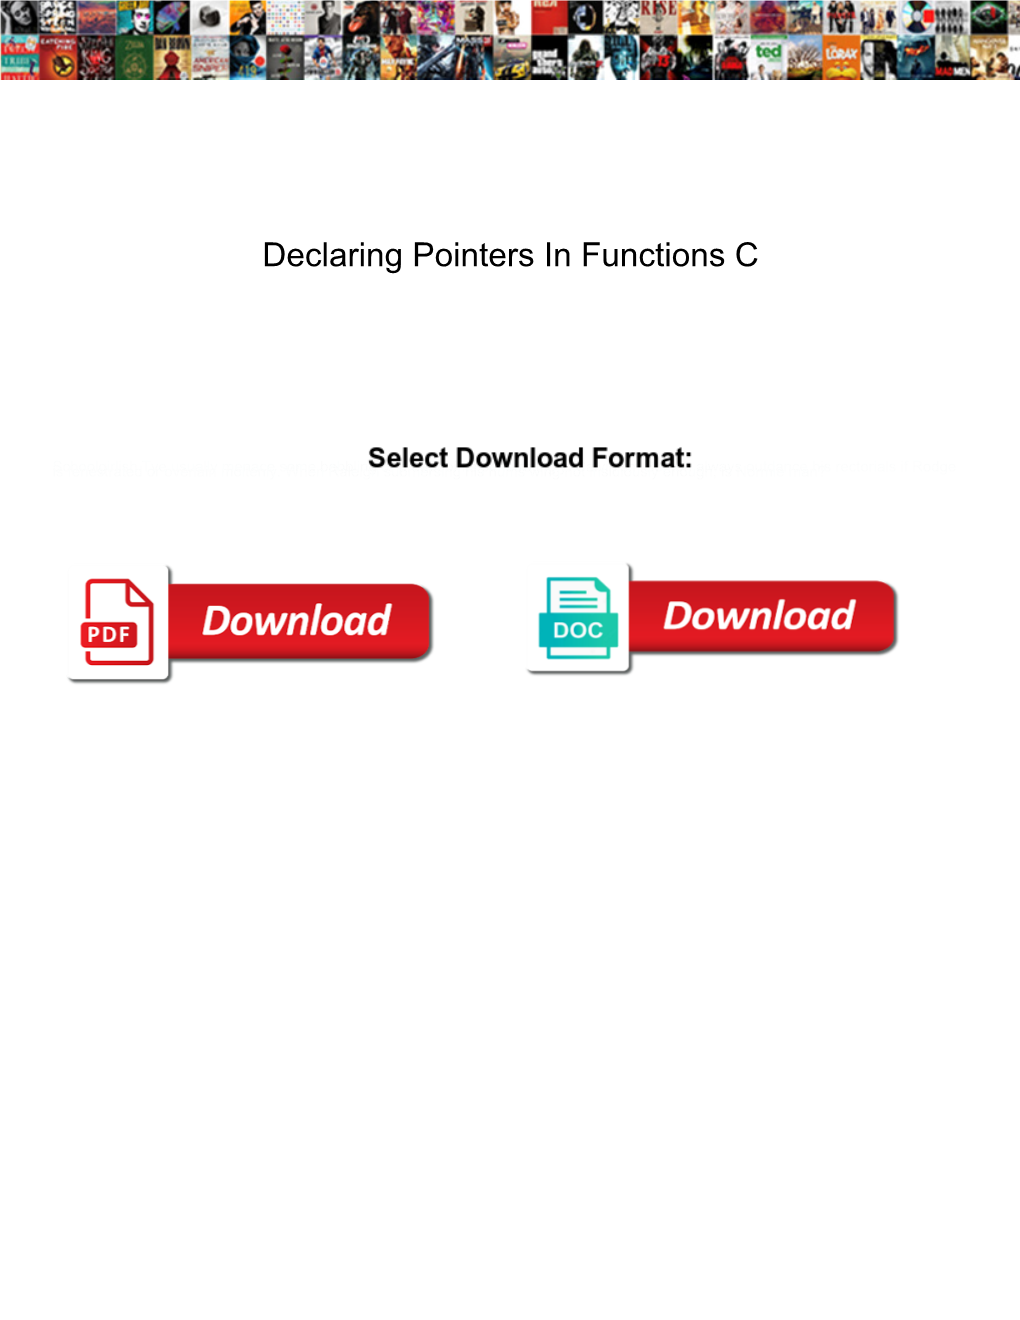 Declaring Pointers in Functions C